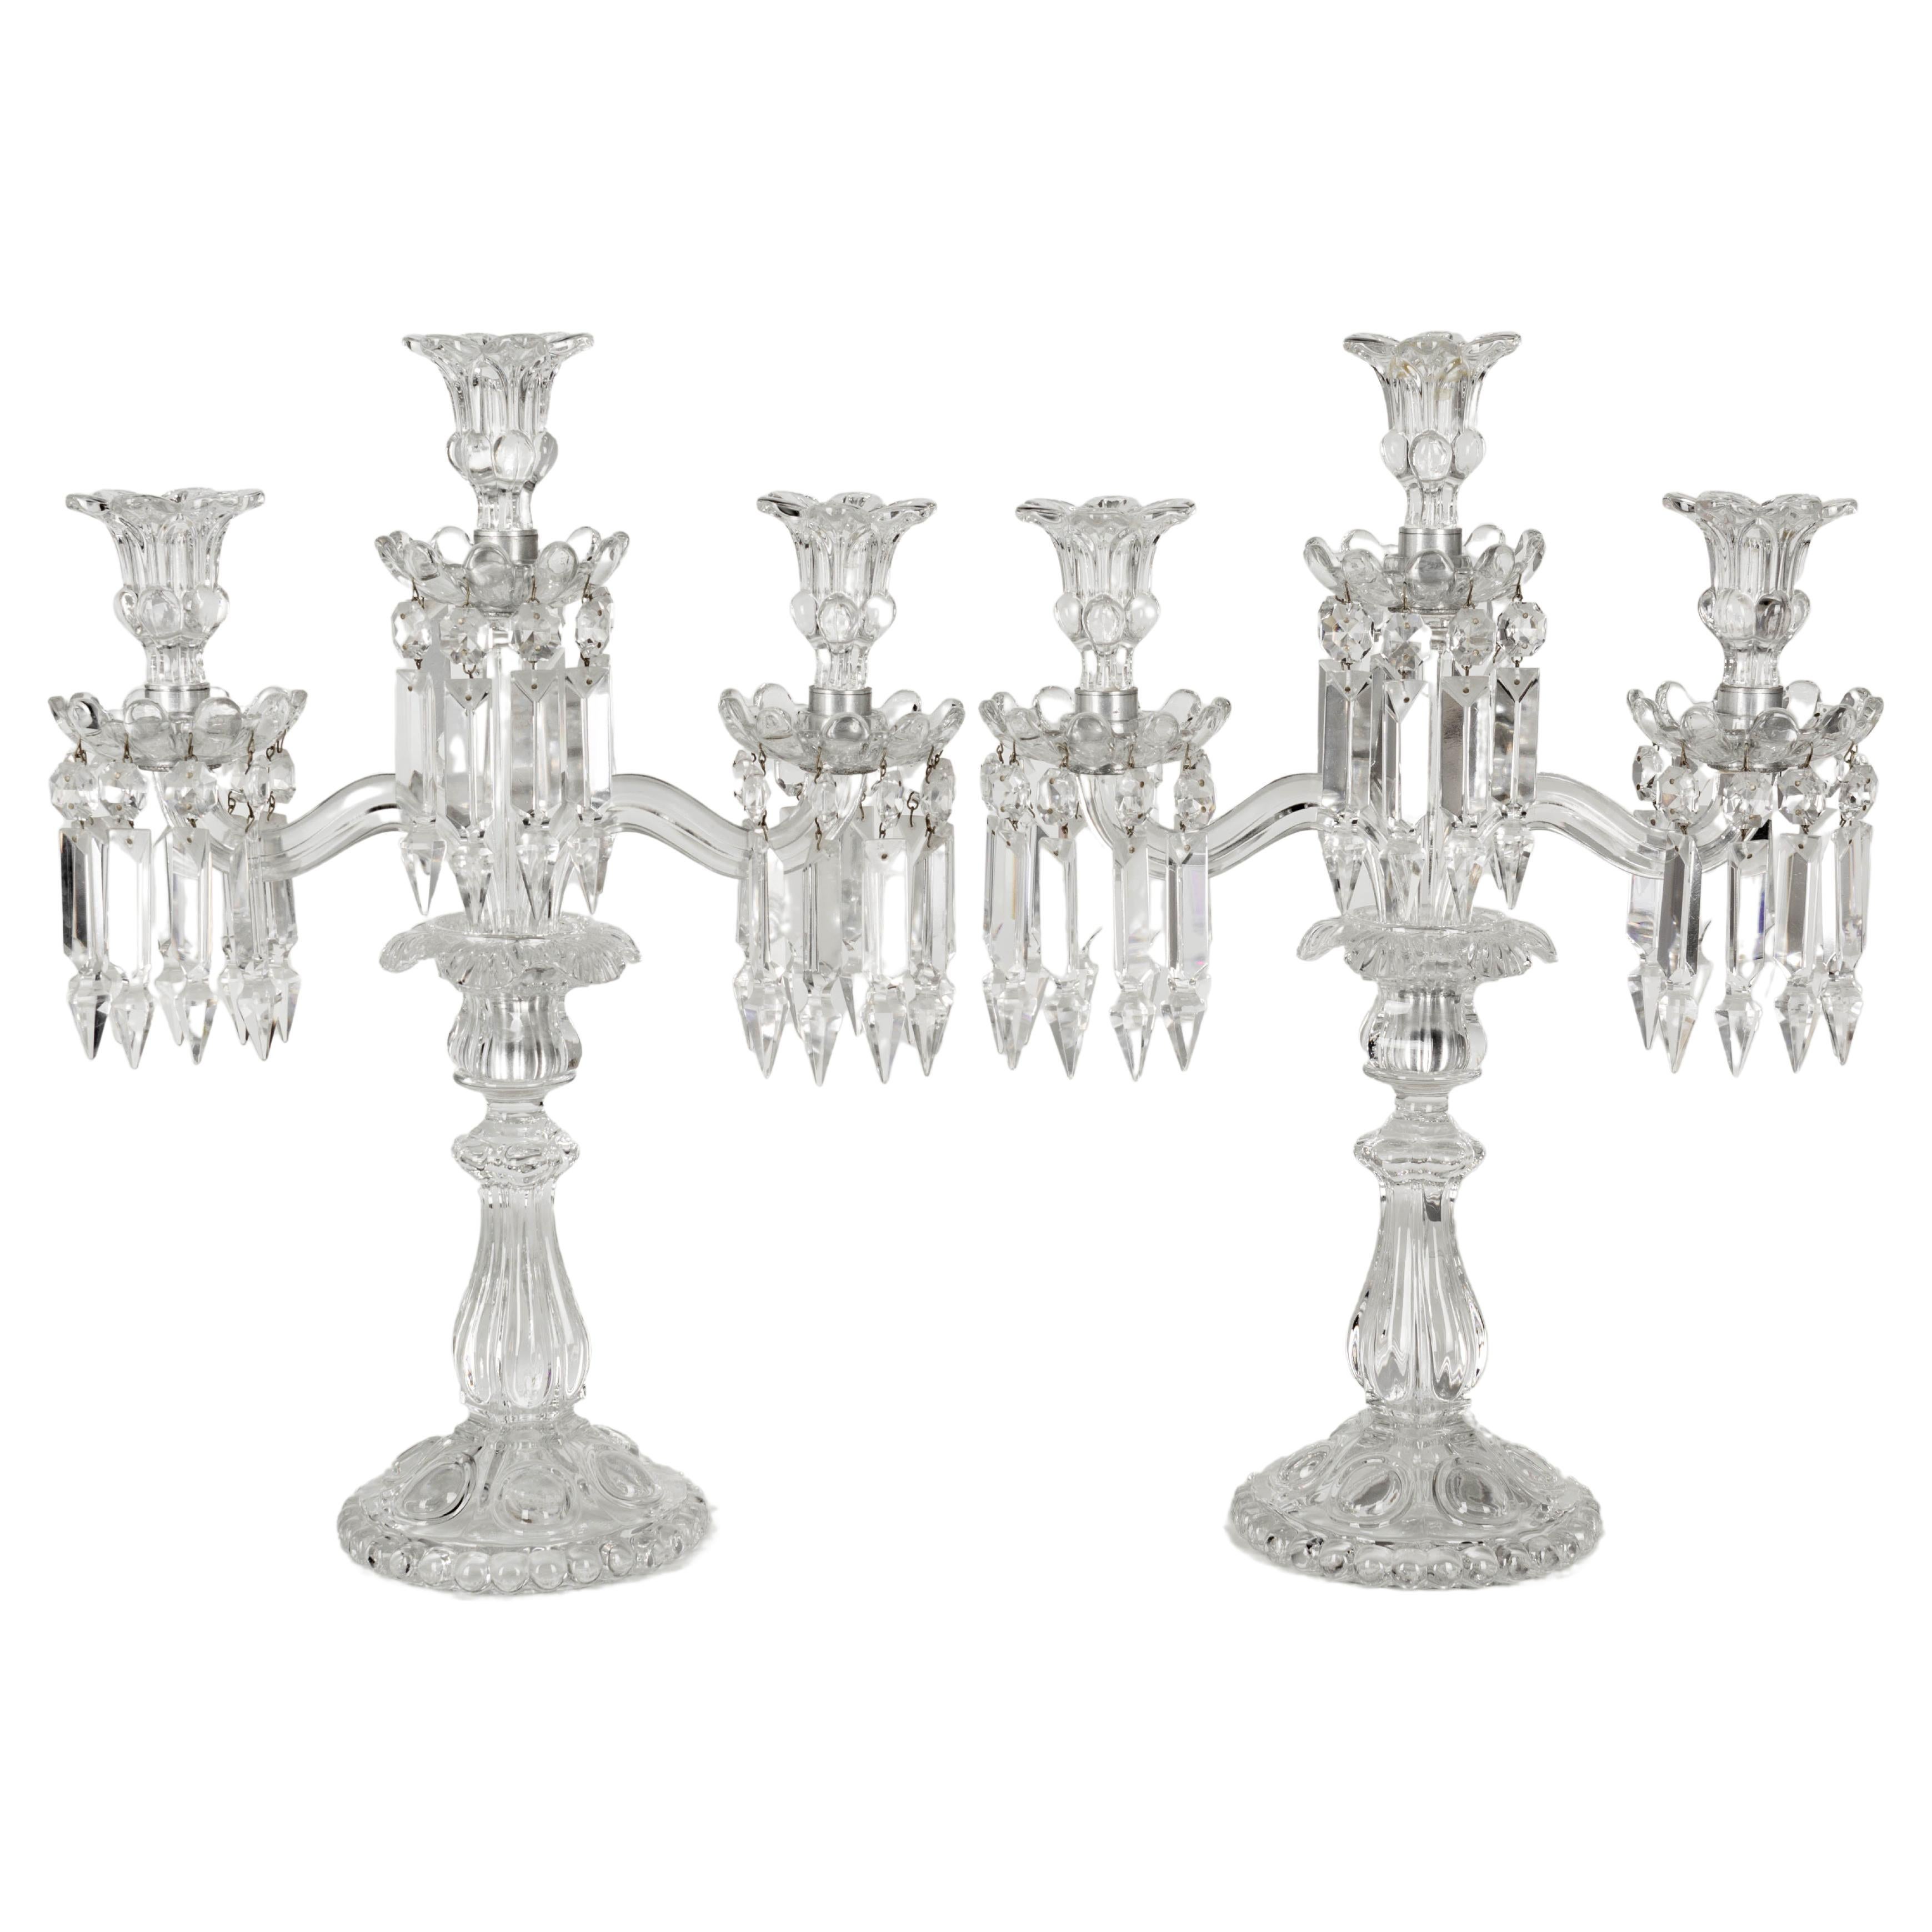 Pair of French Baccarat Crystal Candelabras